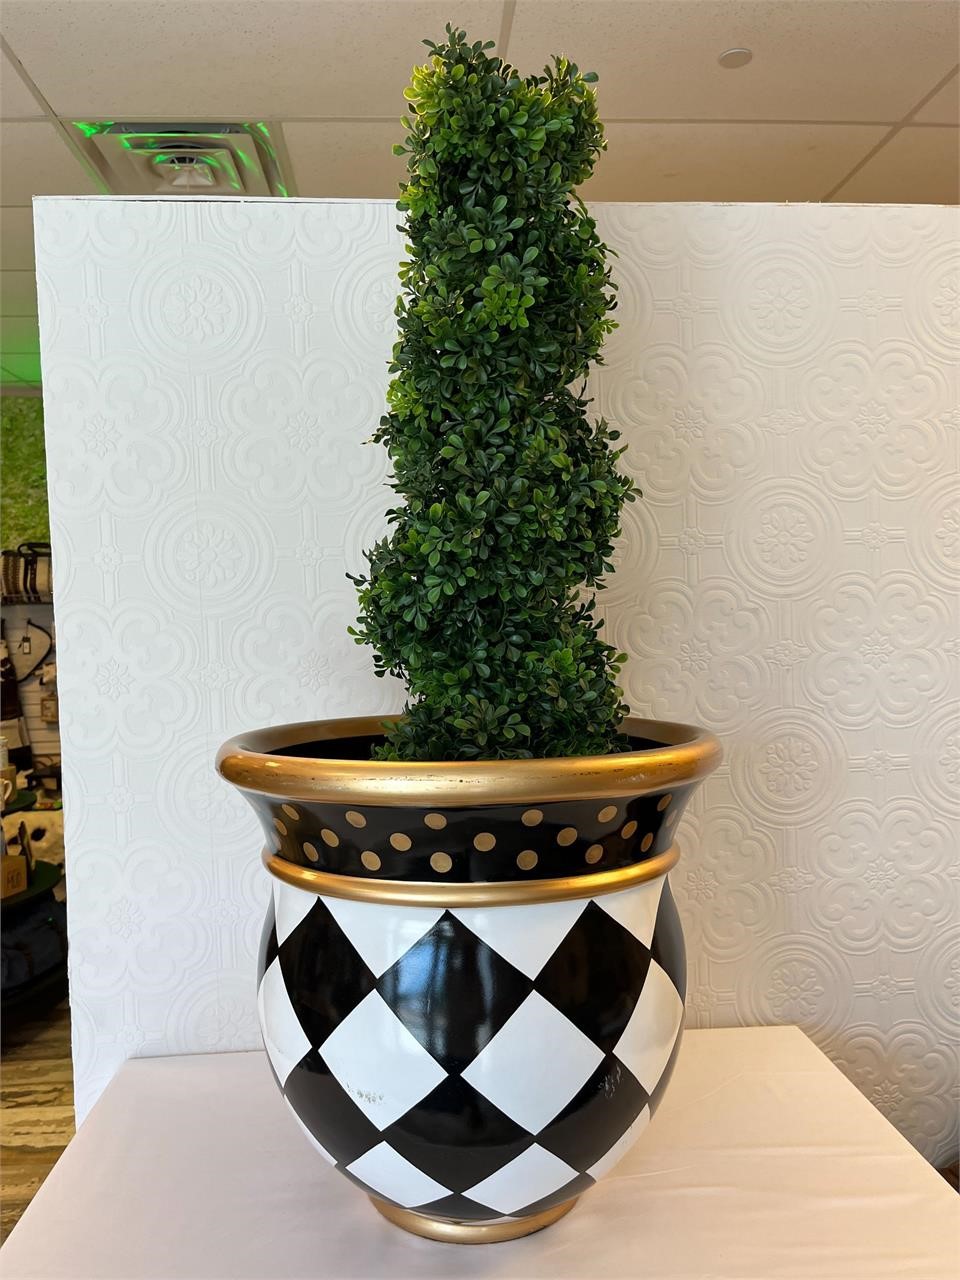 Harlequin Planter and Faux Topiary